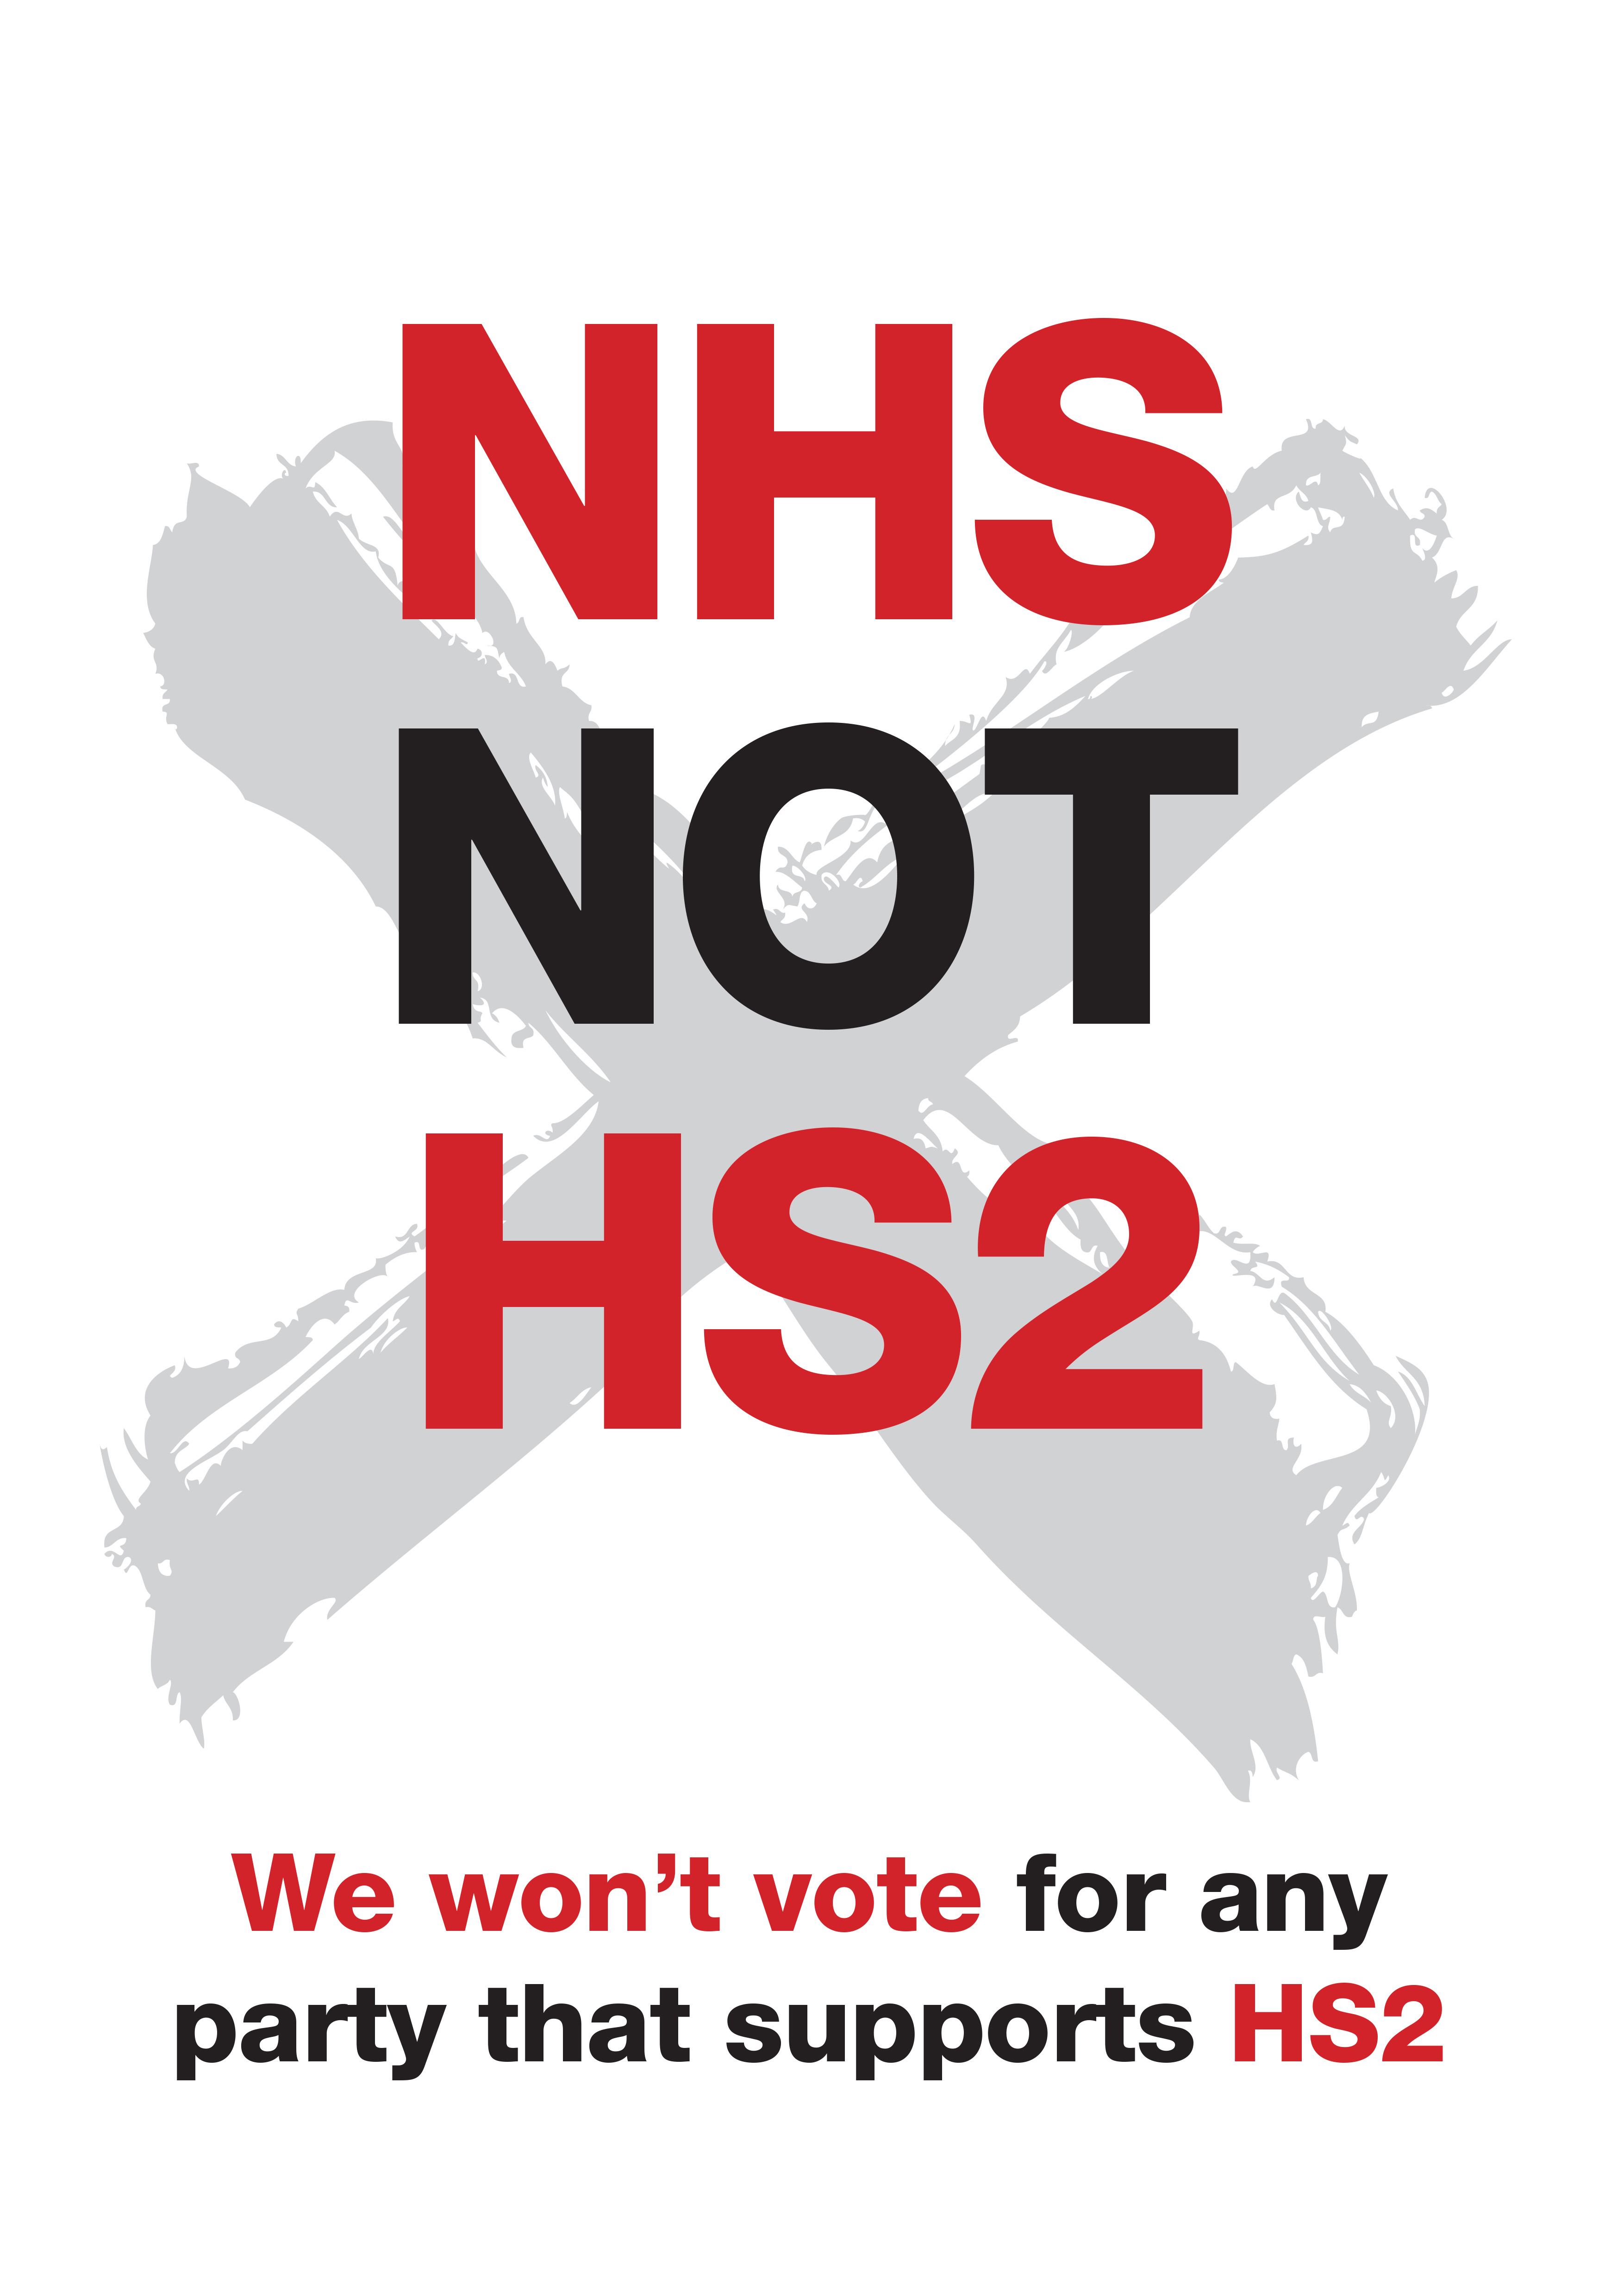 Stop HS2 pre-election poster "NHS not HS2"